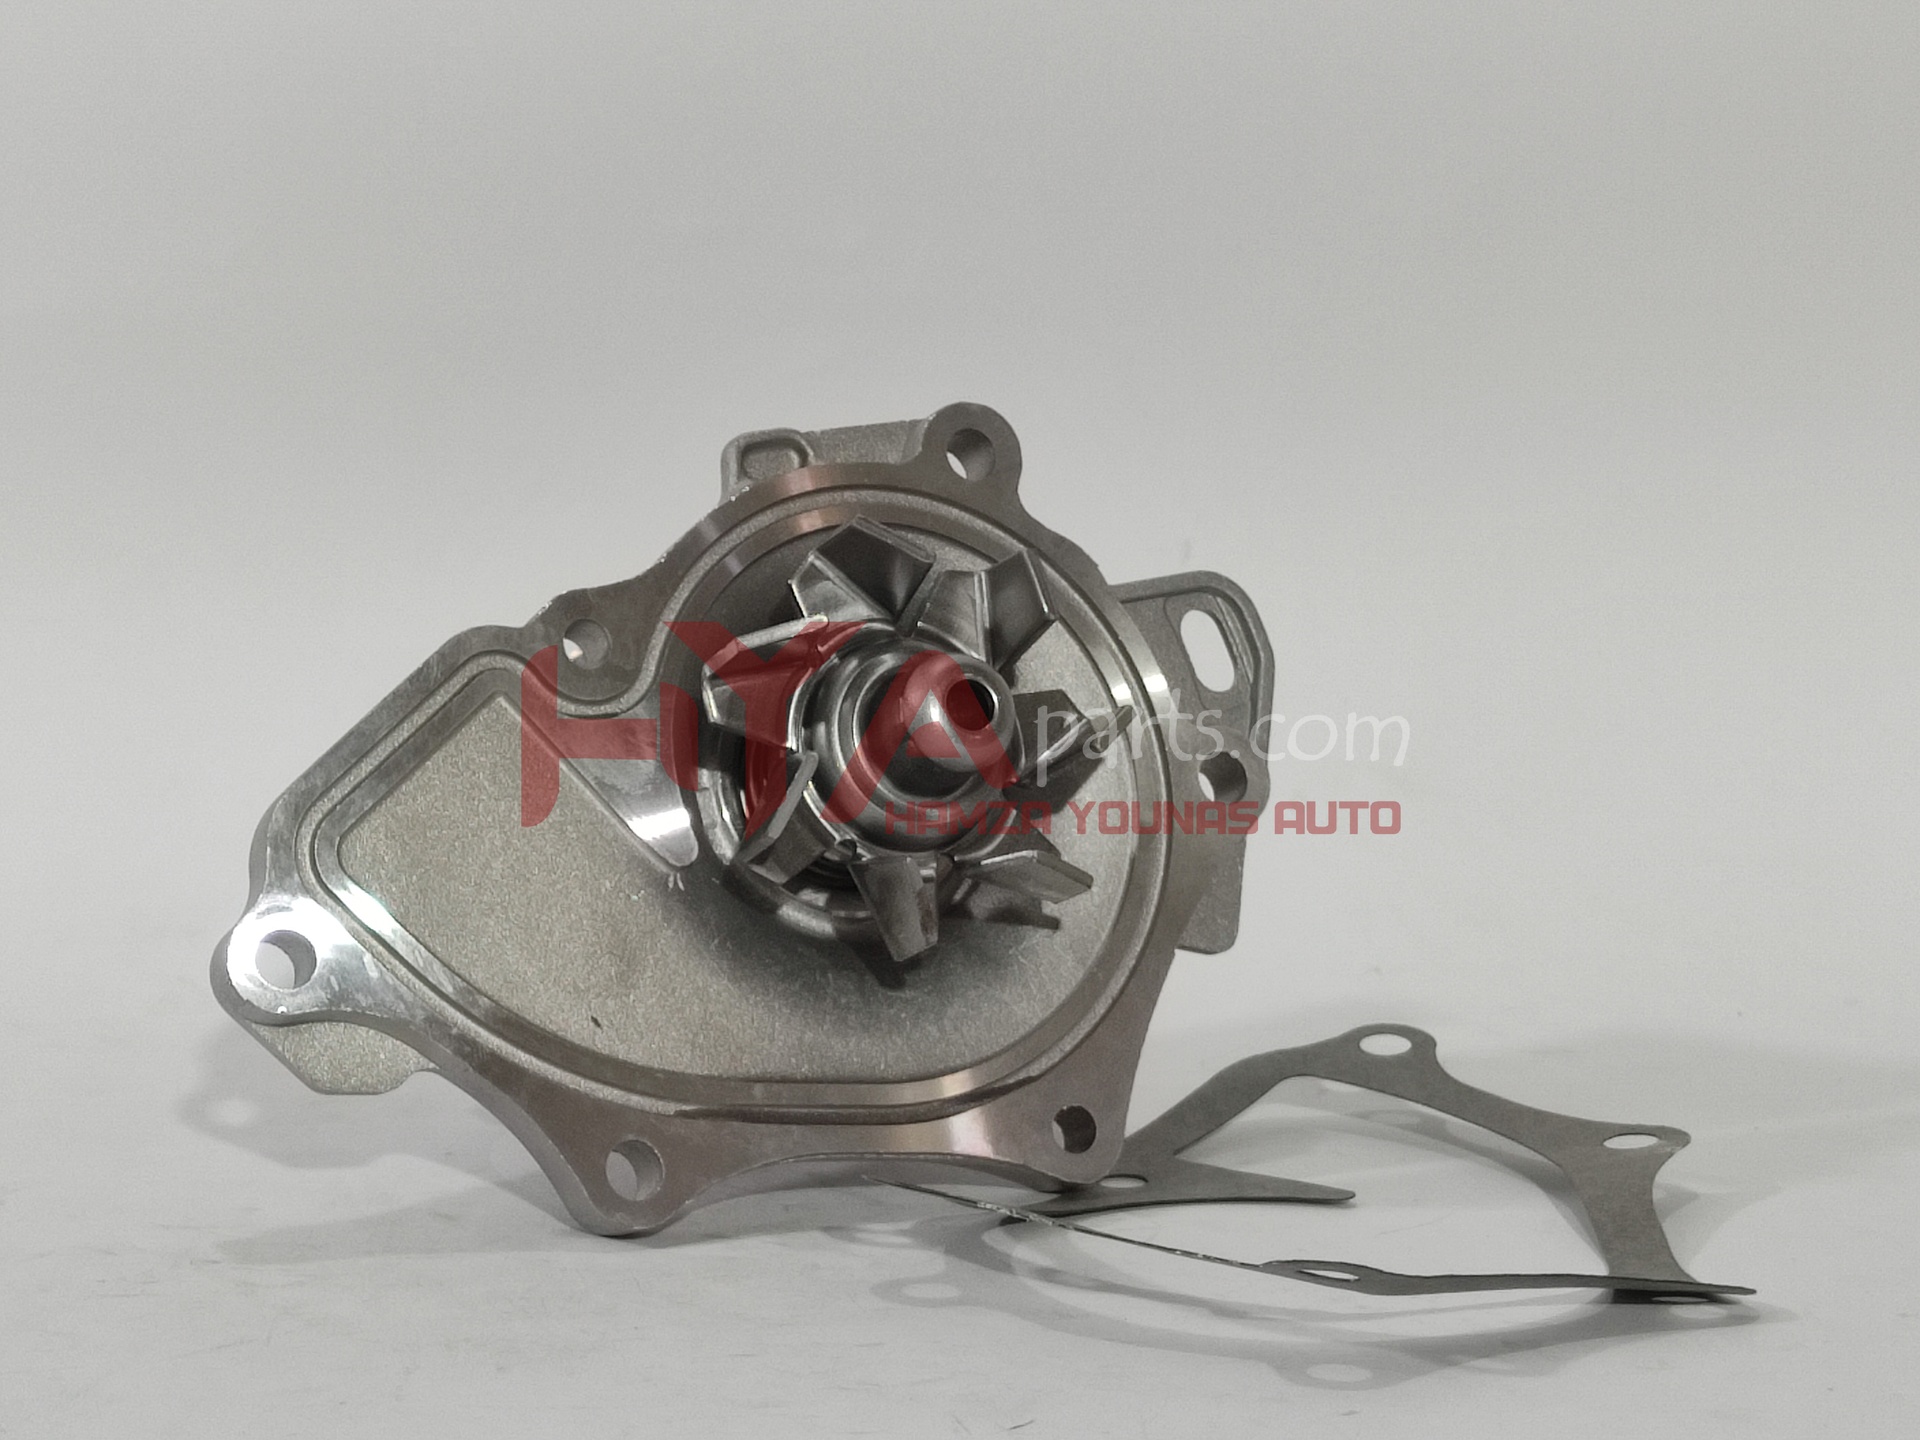 [NPW T-134] PUMP ASSY, ENGINE WATER (WATER BODY)